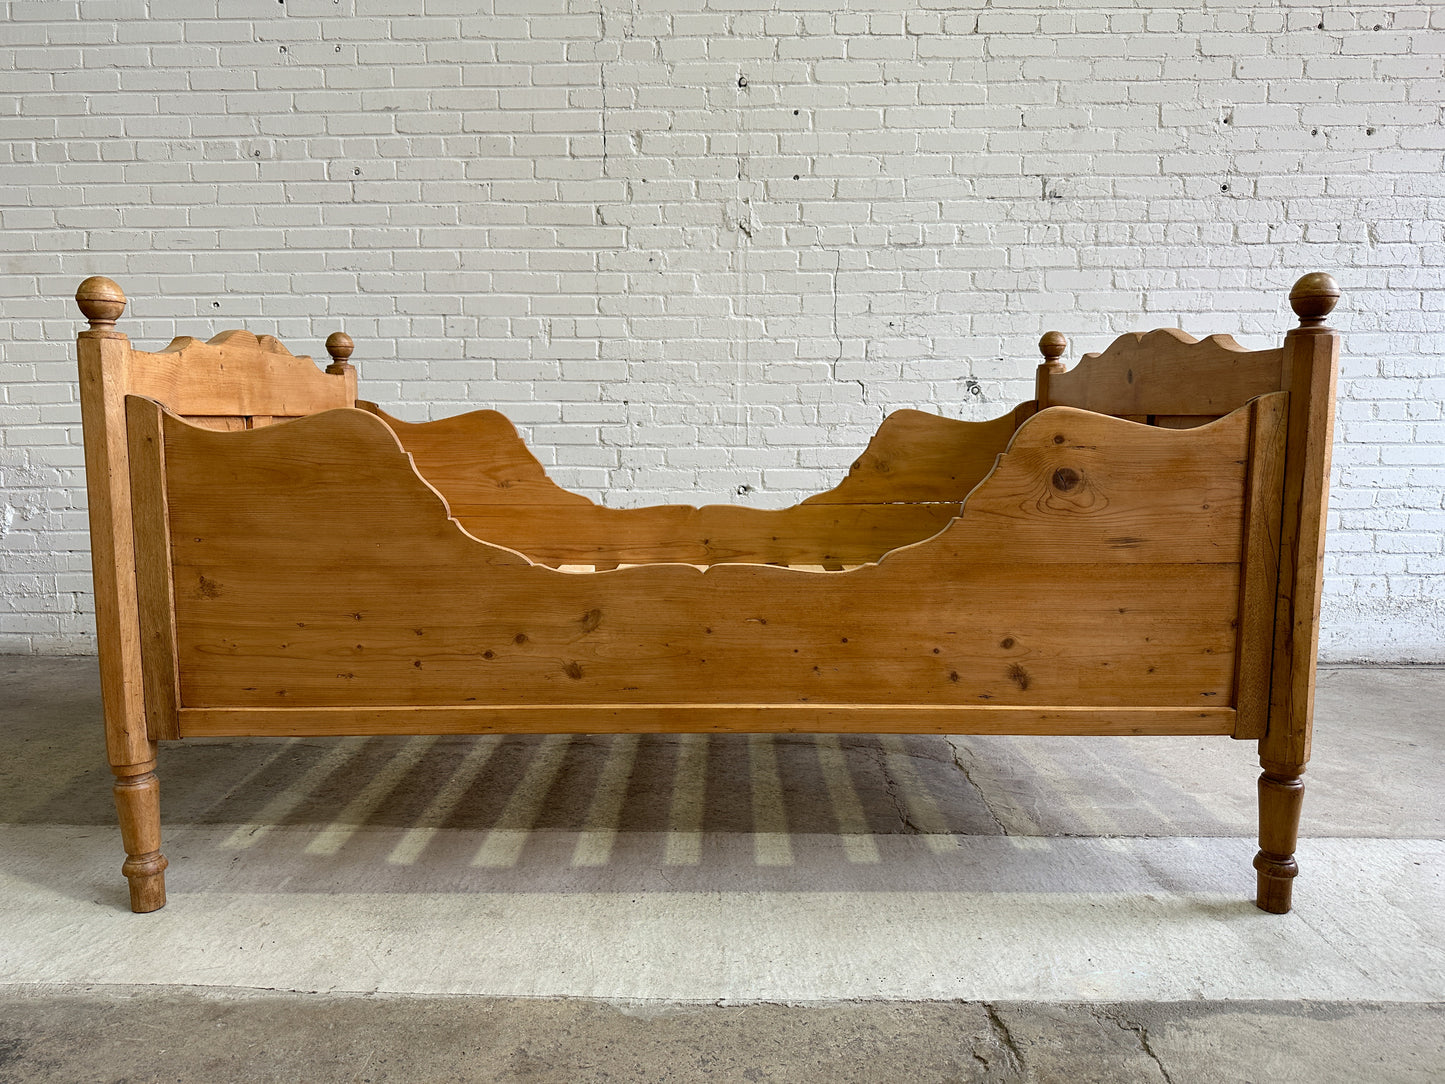 Antique Pine Sleigh Bed with Scalloped Side Rails, c. 1880